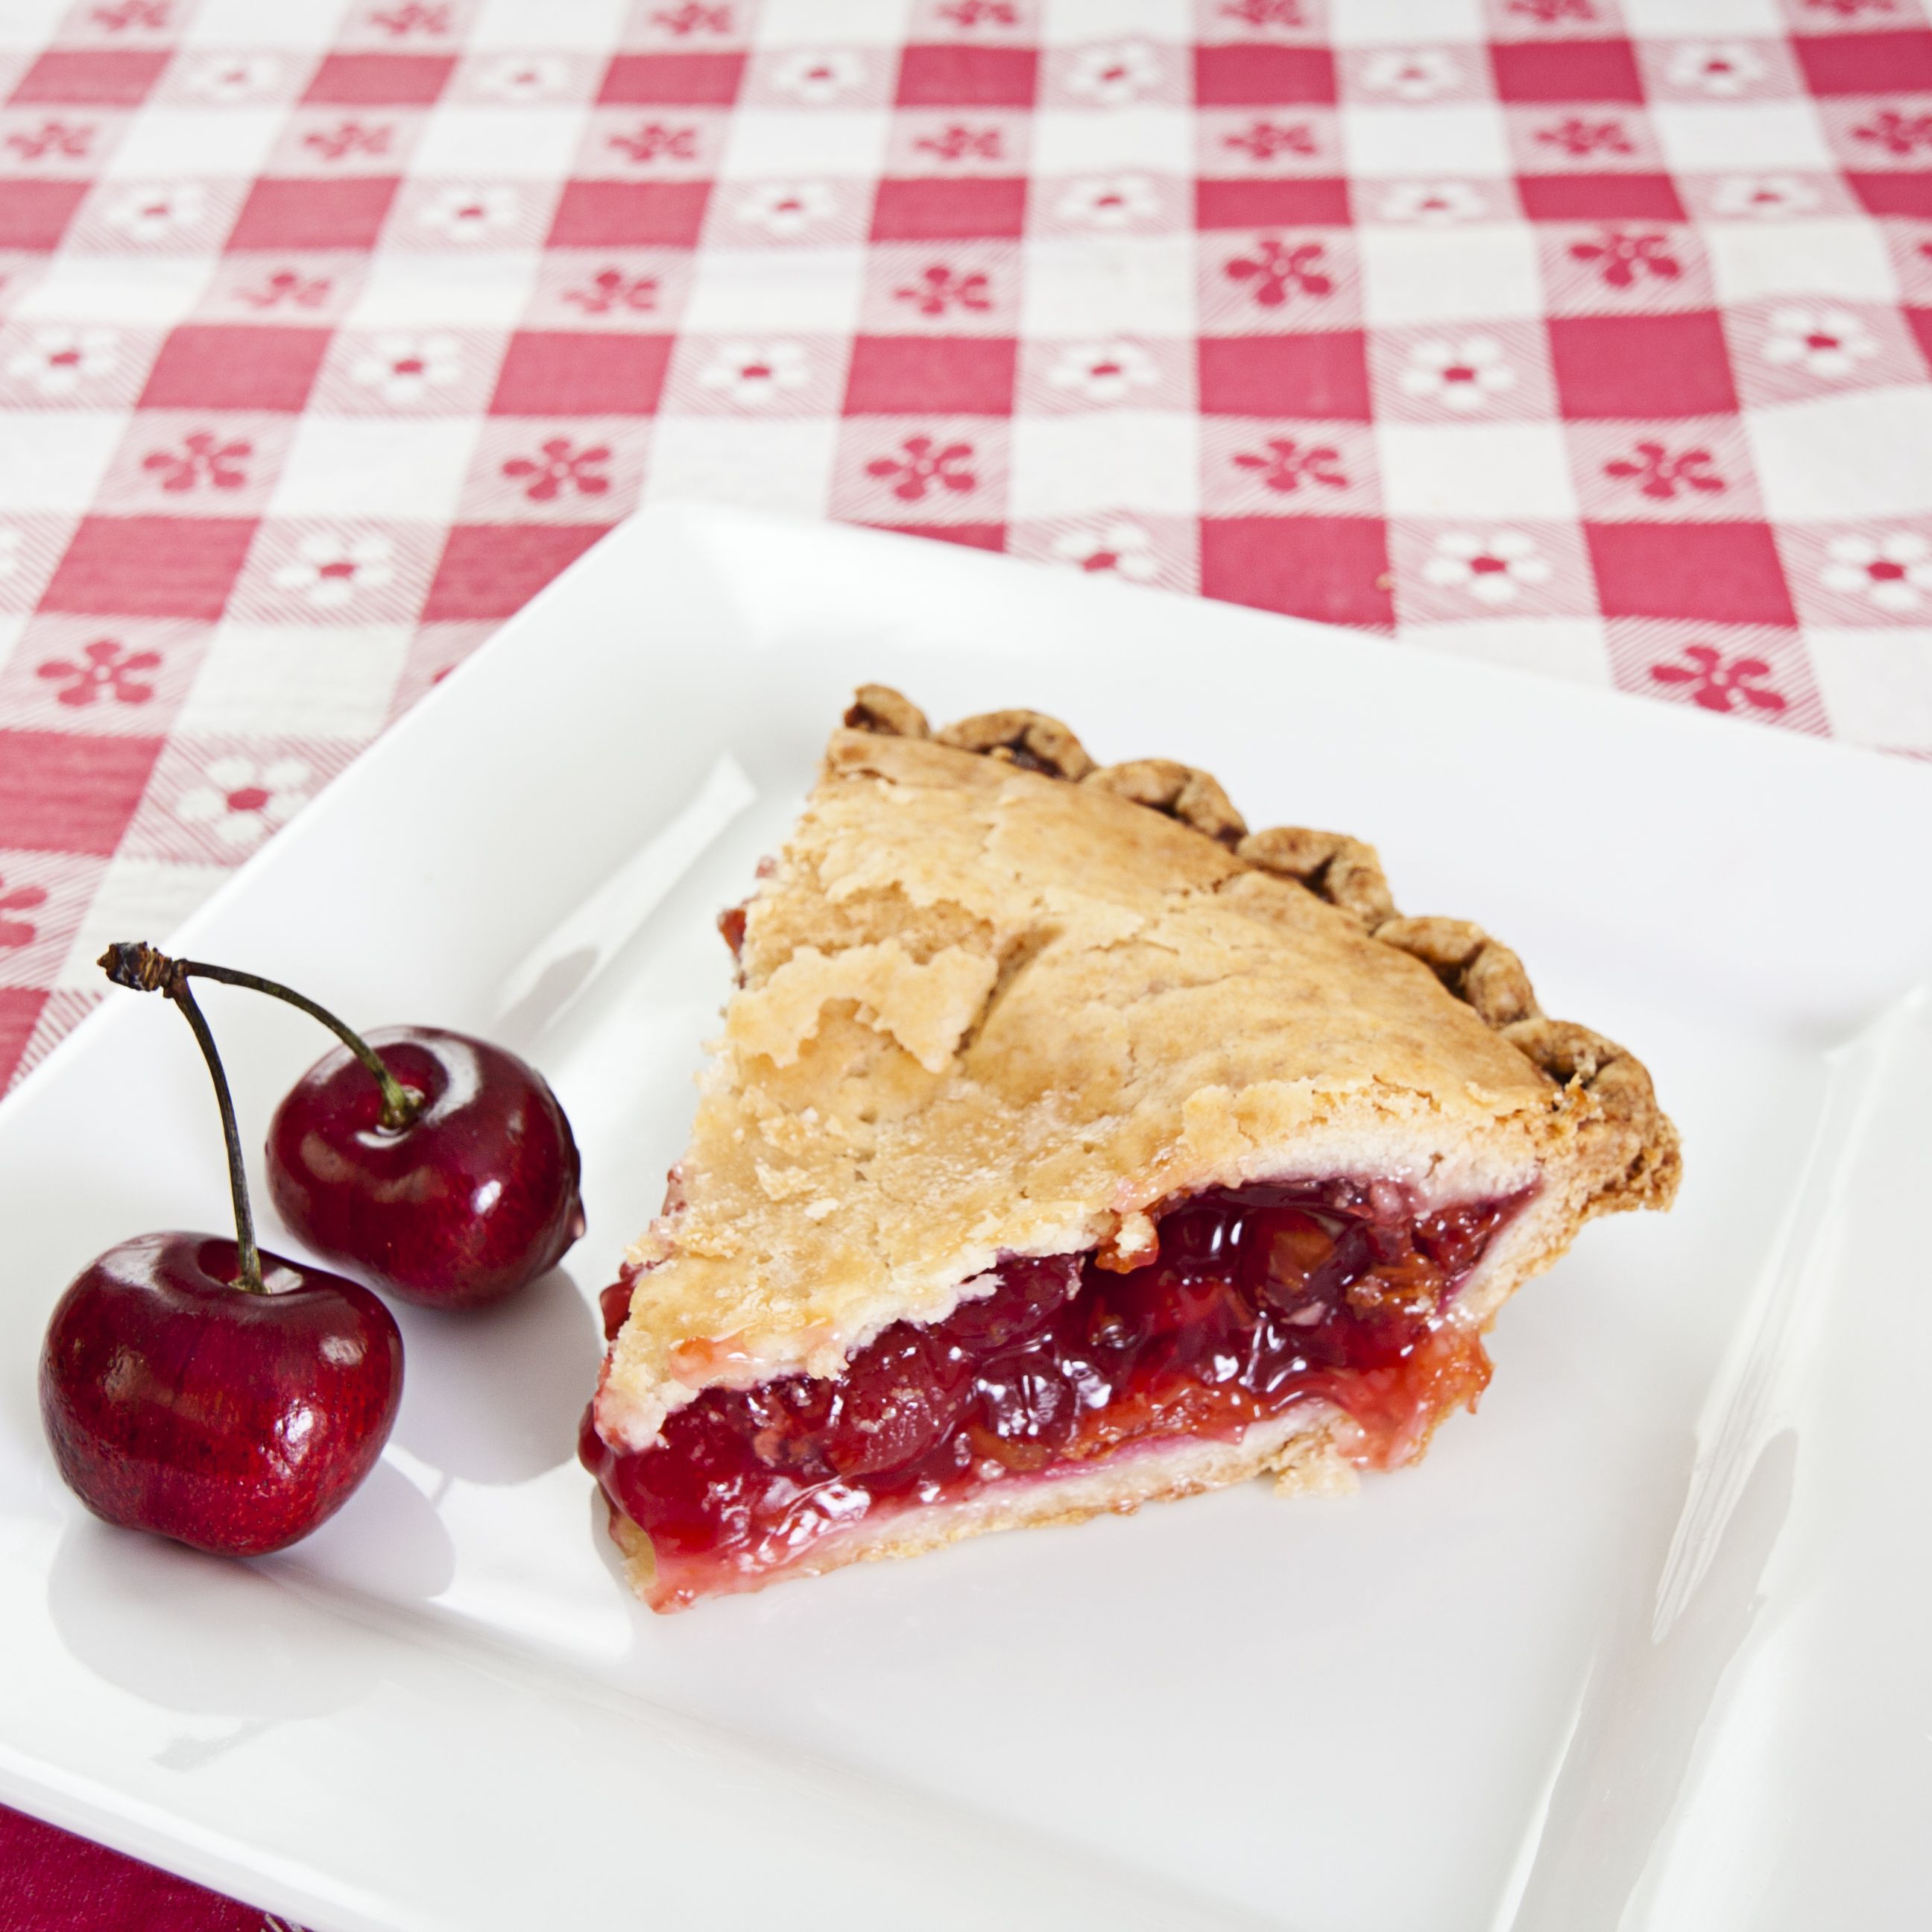 slice-of-cherry-pie-with-cherry-on-side-on-plate-169960522-67fcb3cdc8024ea48f2f5a8cd3d2fd8c.jpg